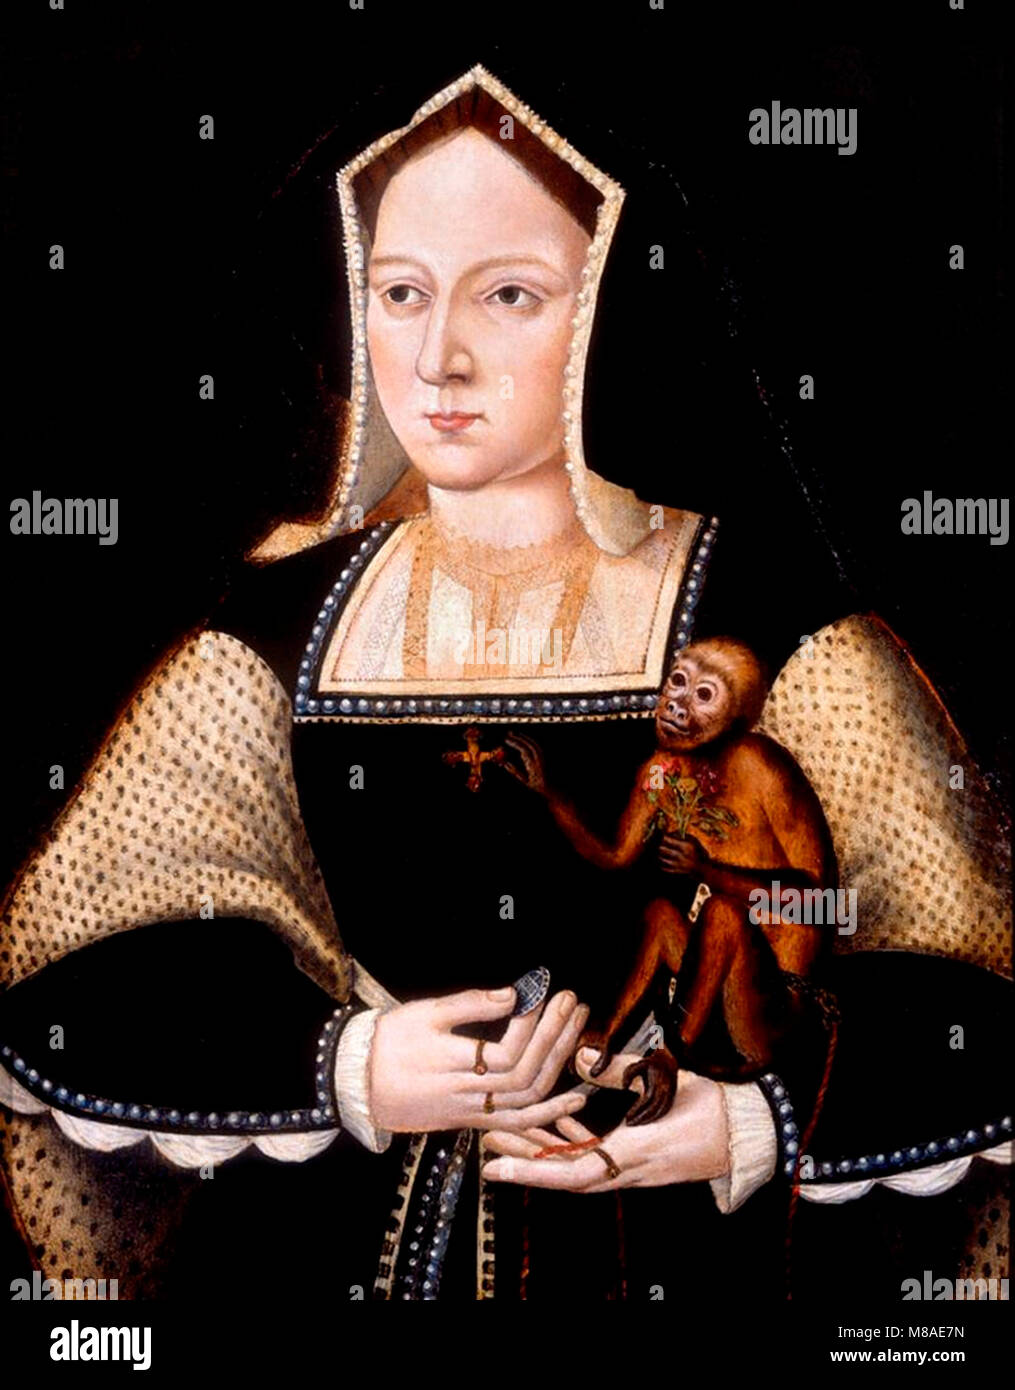 Catherine of Aragon by Lucas Horenbout, c.1525. Stock Photo